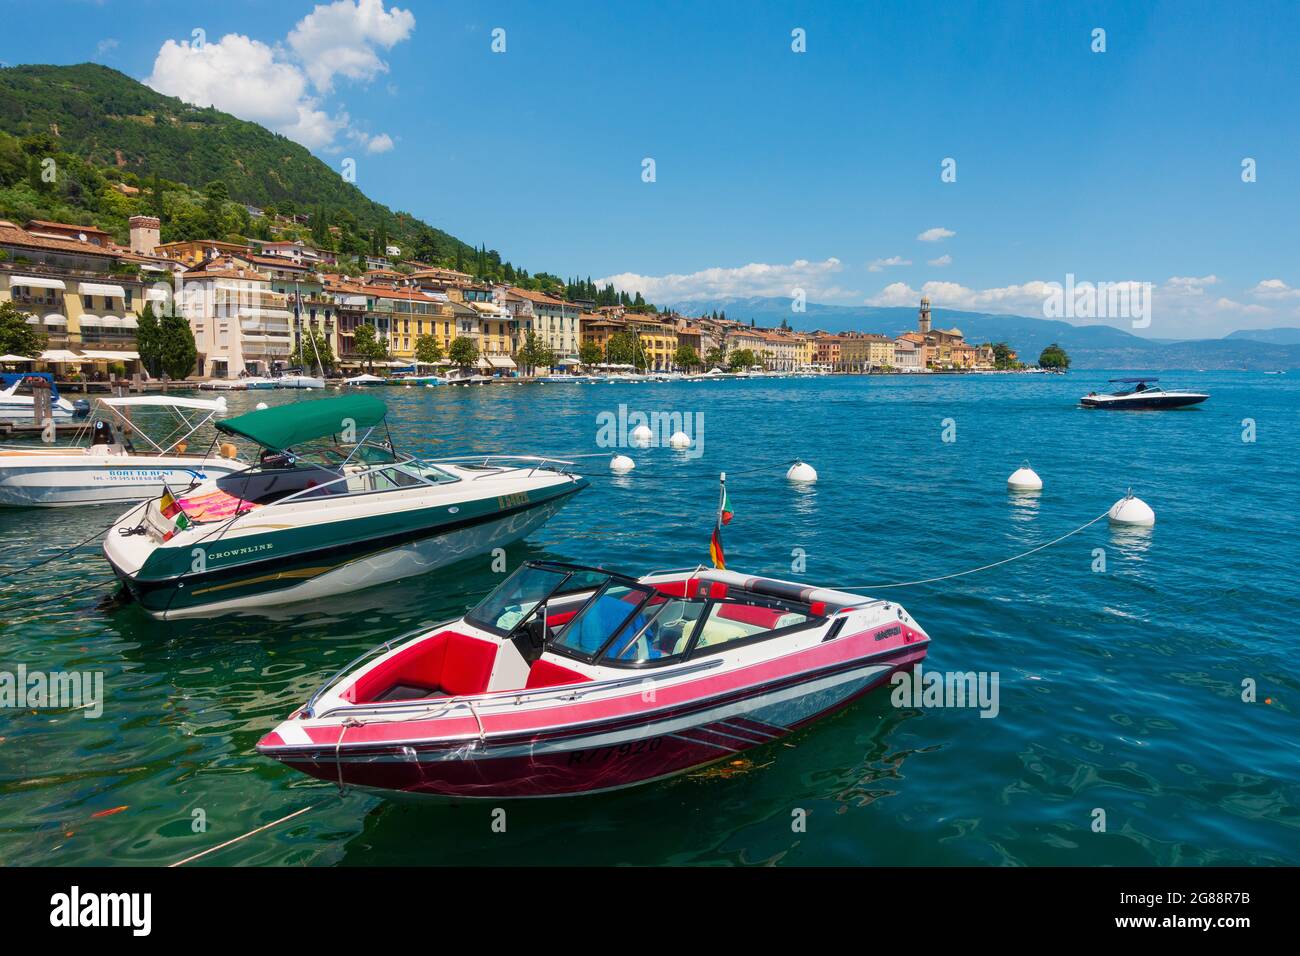 Famous city of Saló at Gardalake in Italy Stock Photo